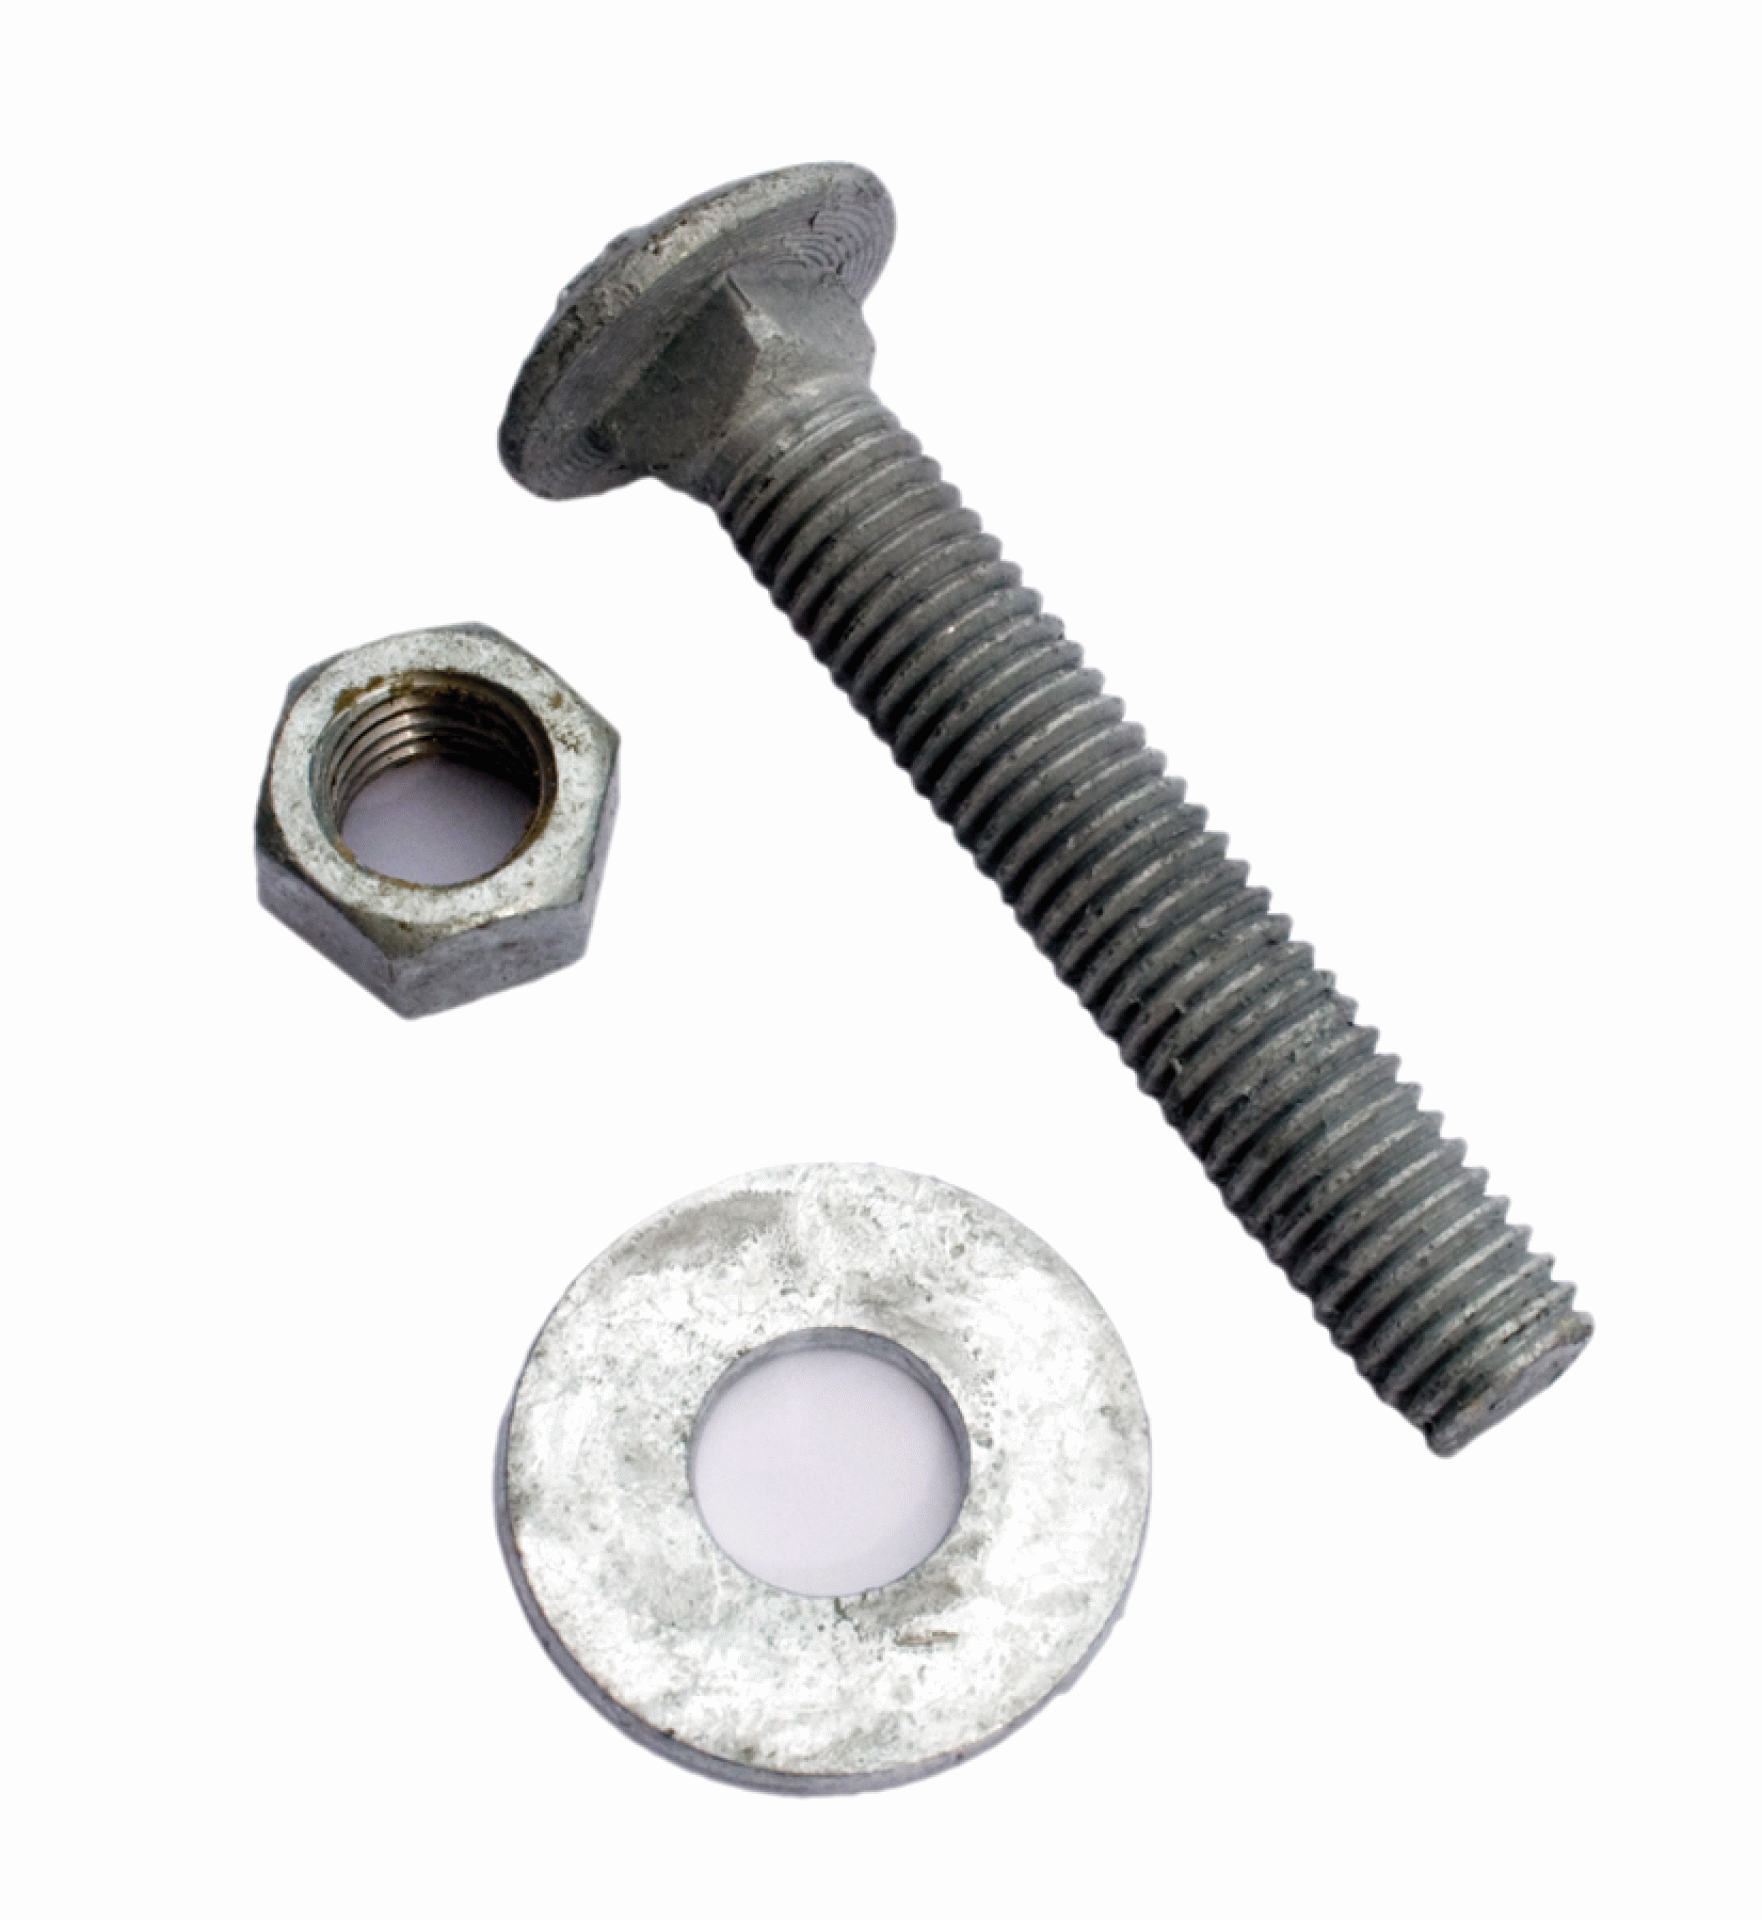 TIE DOWN ENGINEERING INC | 26535 | BOLT CARRIAGE SET COMMERCIAL GRADE 1/2" X 3"